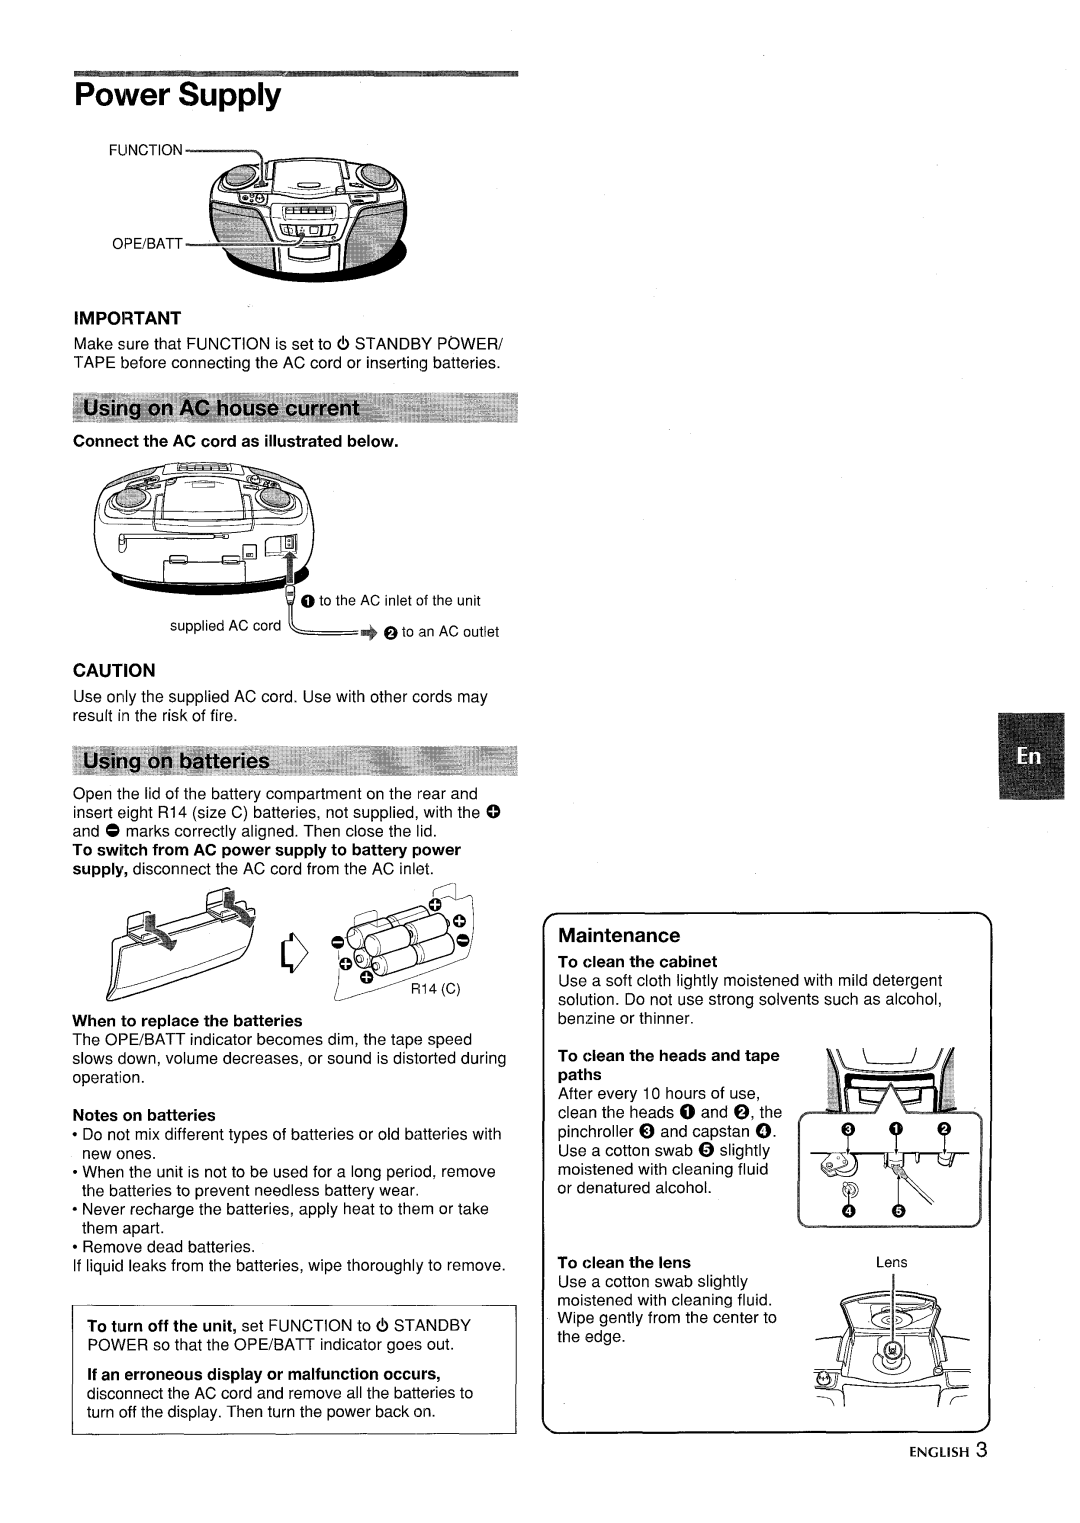 Aiwa CSD-ES365 manual Power Supply, Maintenance, Connect the AC cord as illustrated below, When to replace the batteries 